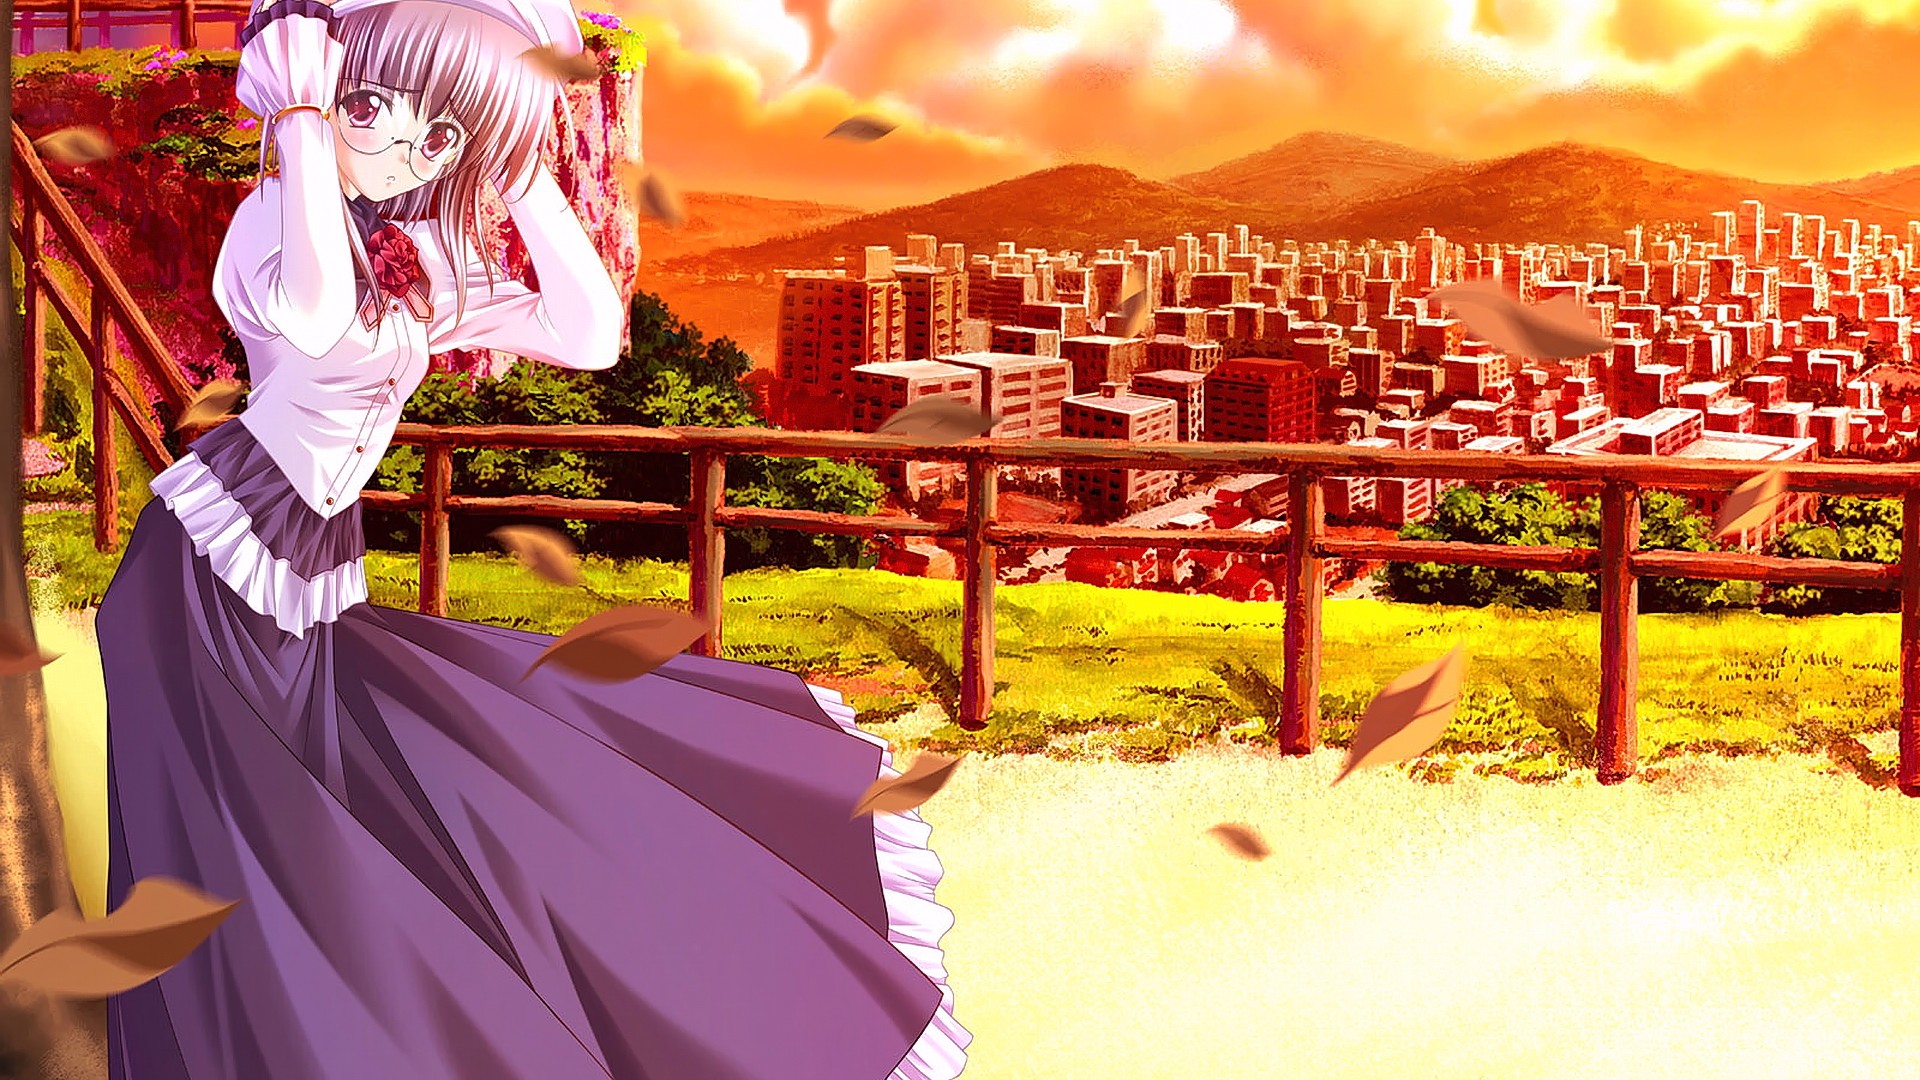 Anime 1920x1080 anime anime girls original characters cityscape women with glasses purple clothing looking at viewer women outdoors